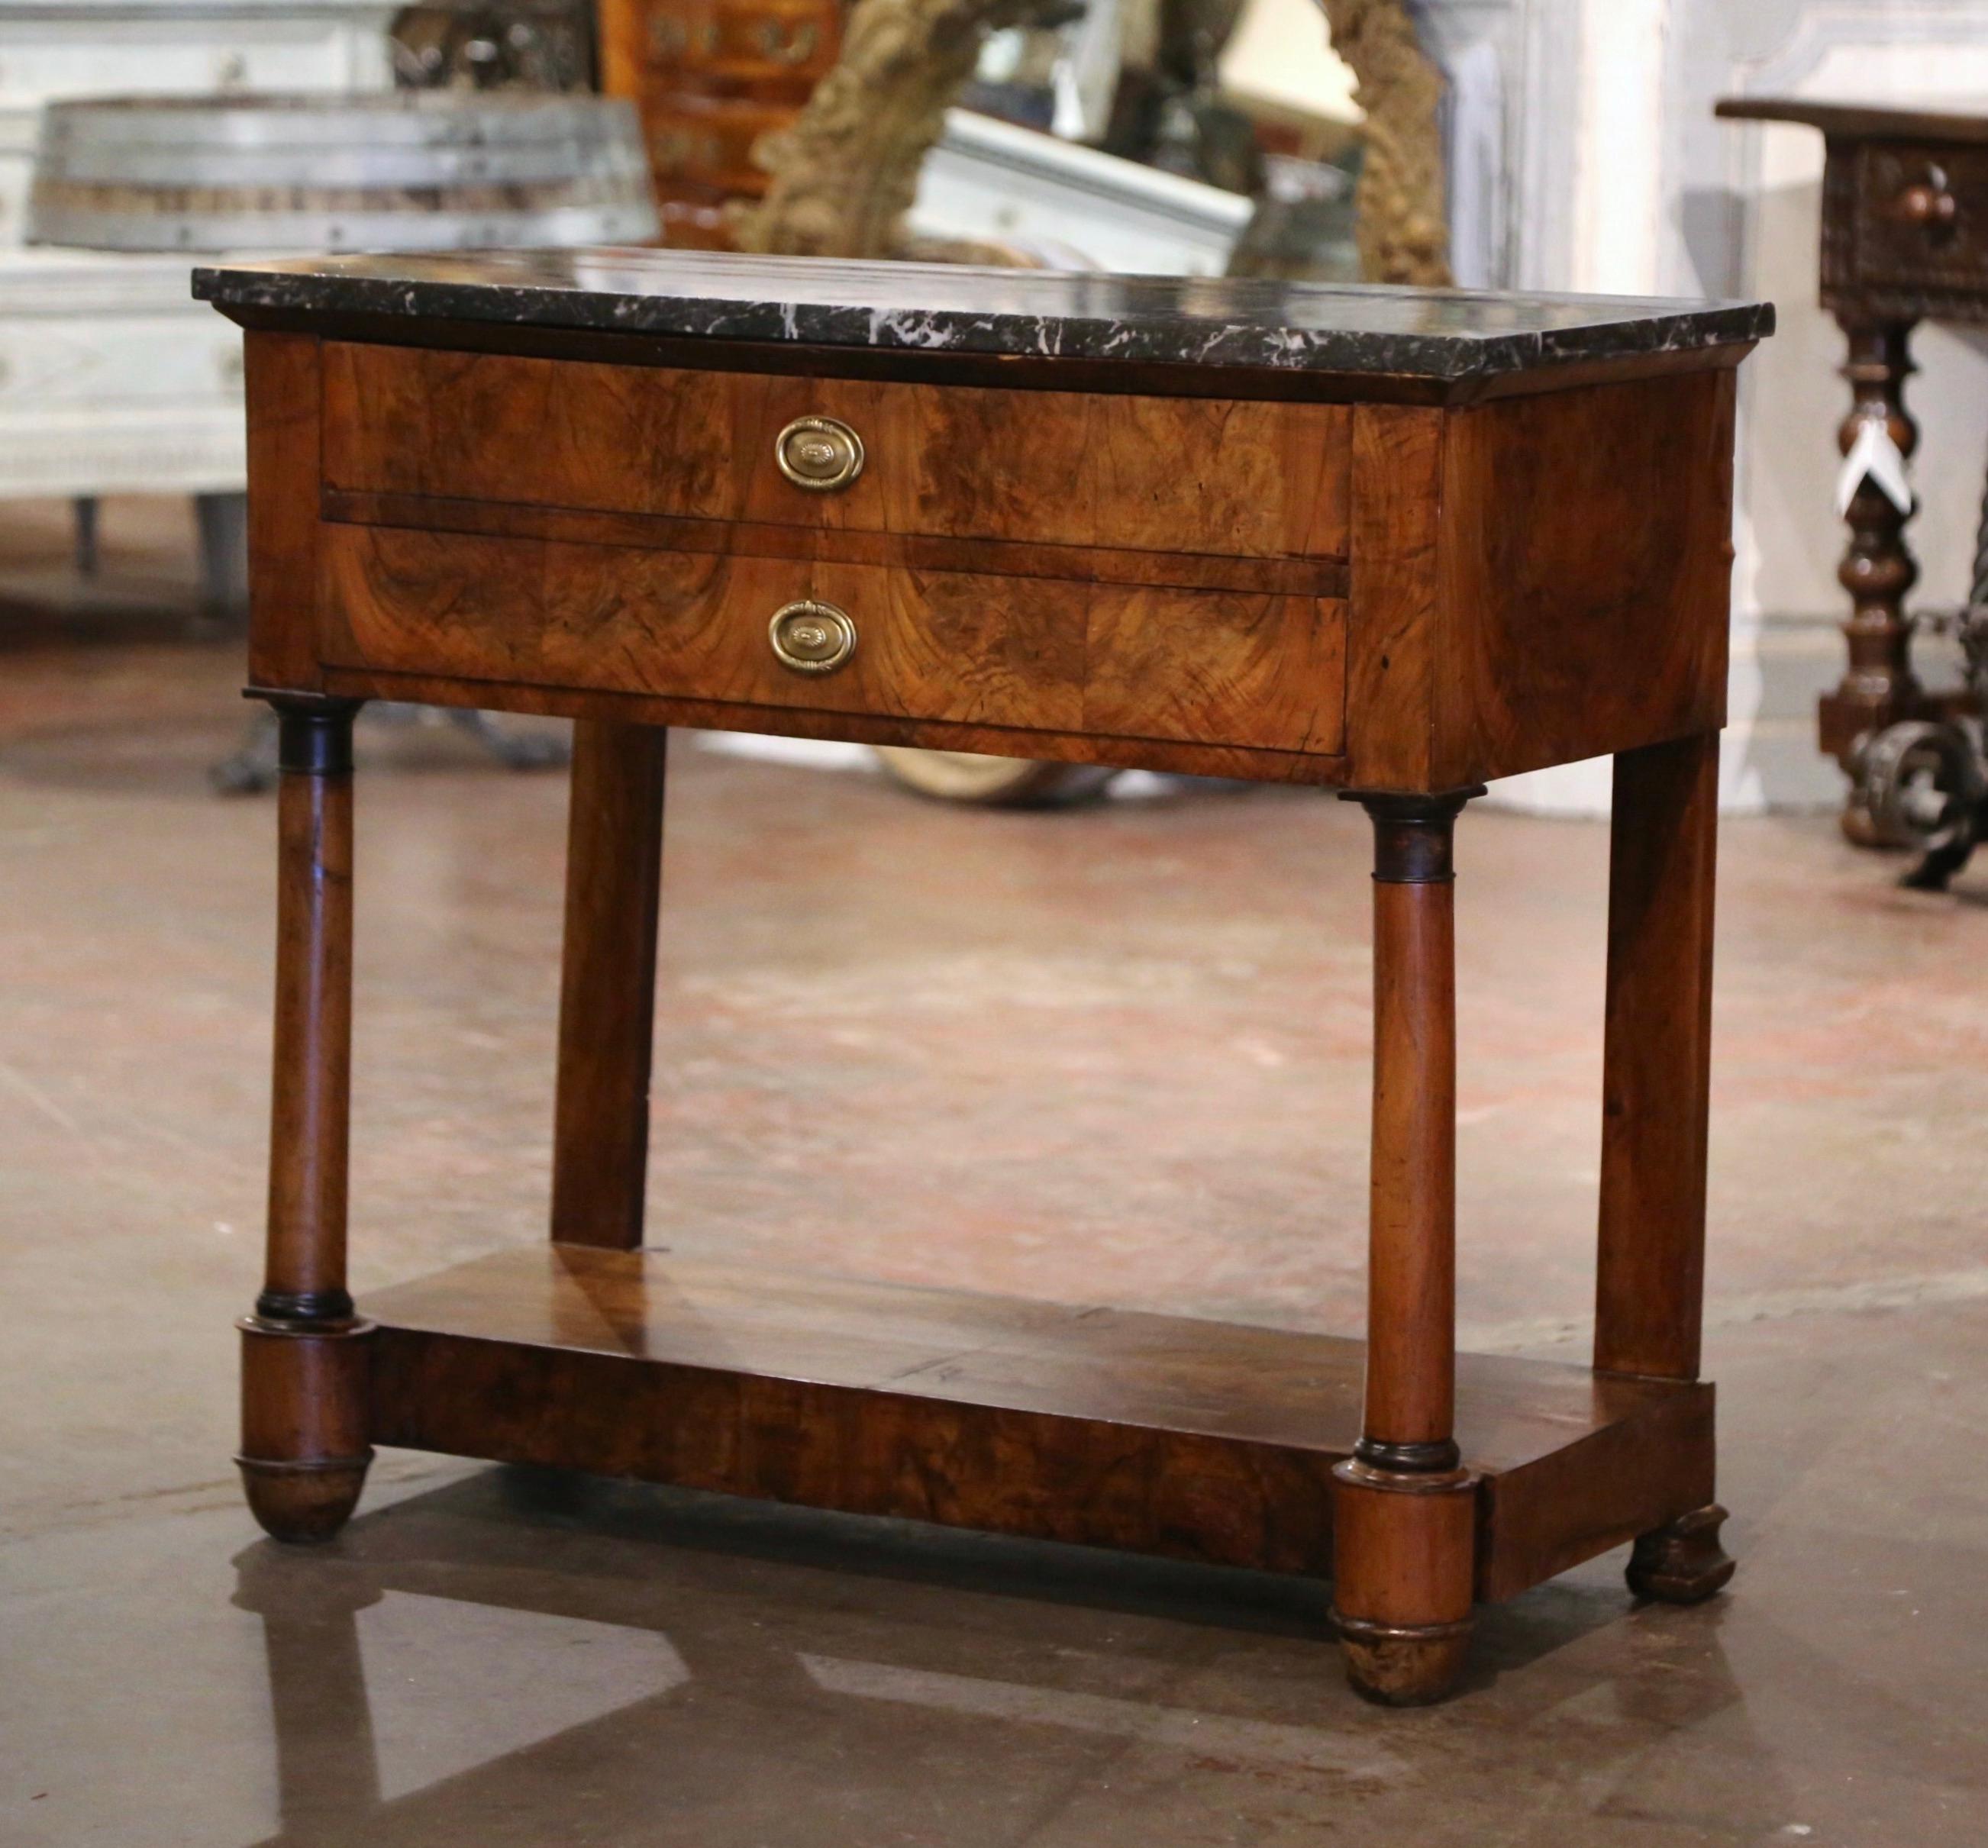 This elegant antique console was crafted in France, circa 1810. Standing on turned front columns ending in round feet, and pilaster legs in the rear over a stretcher platform bottom shelf, the narrow table built of mahogany wood, features two large